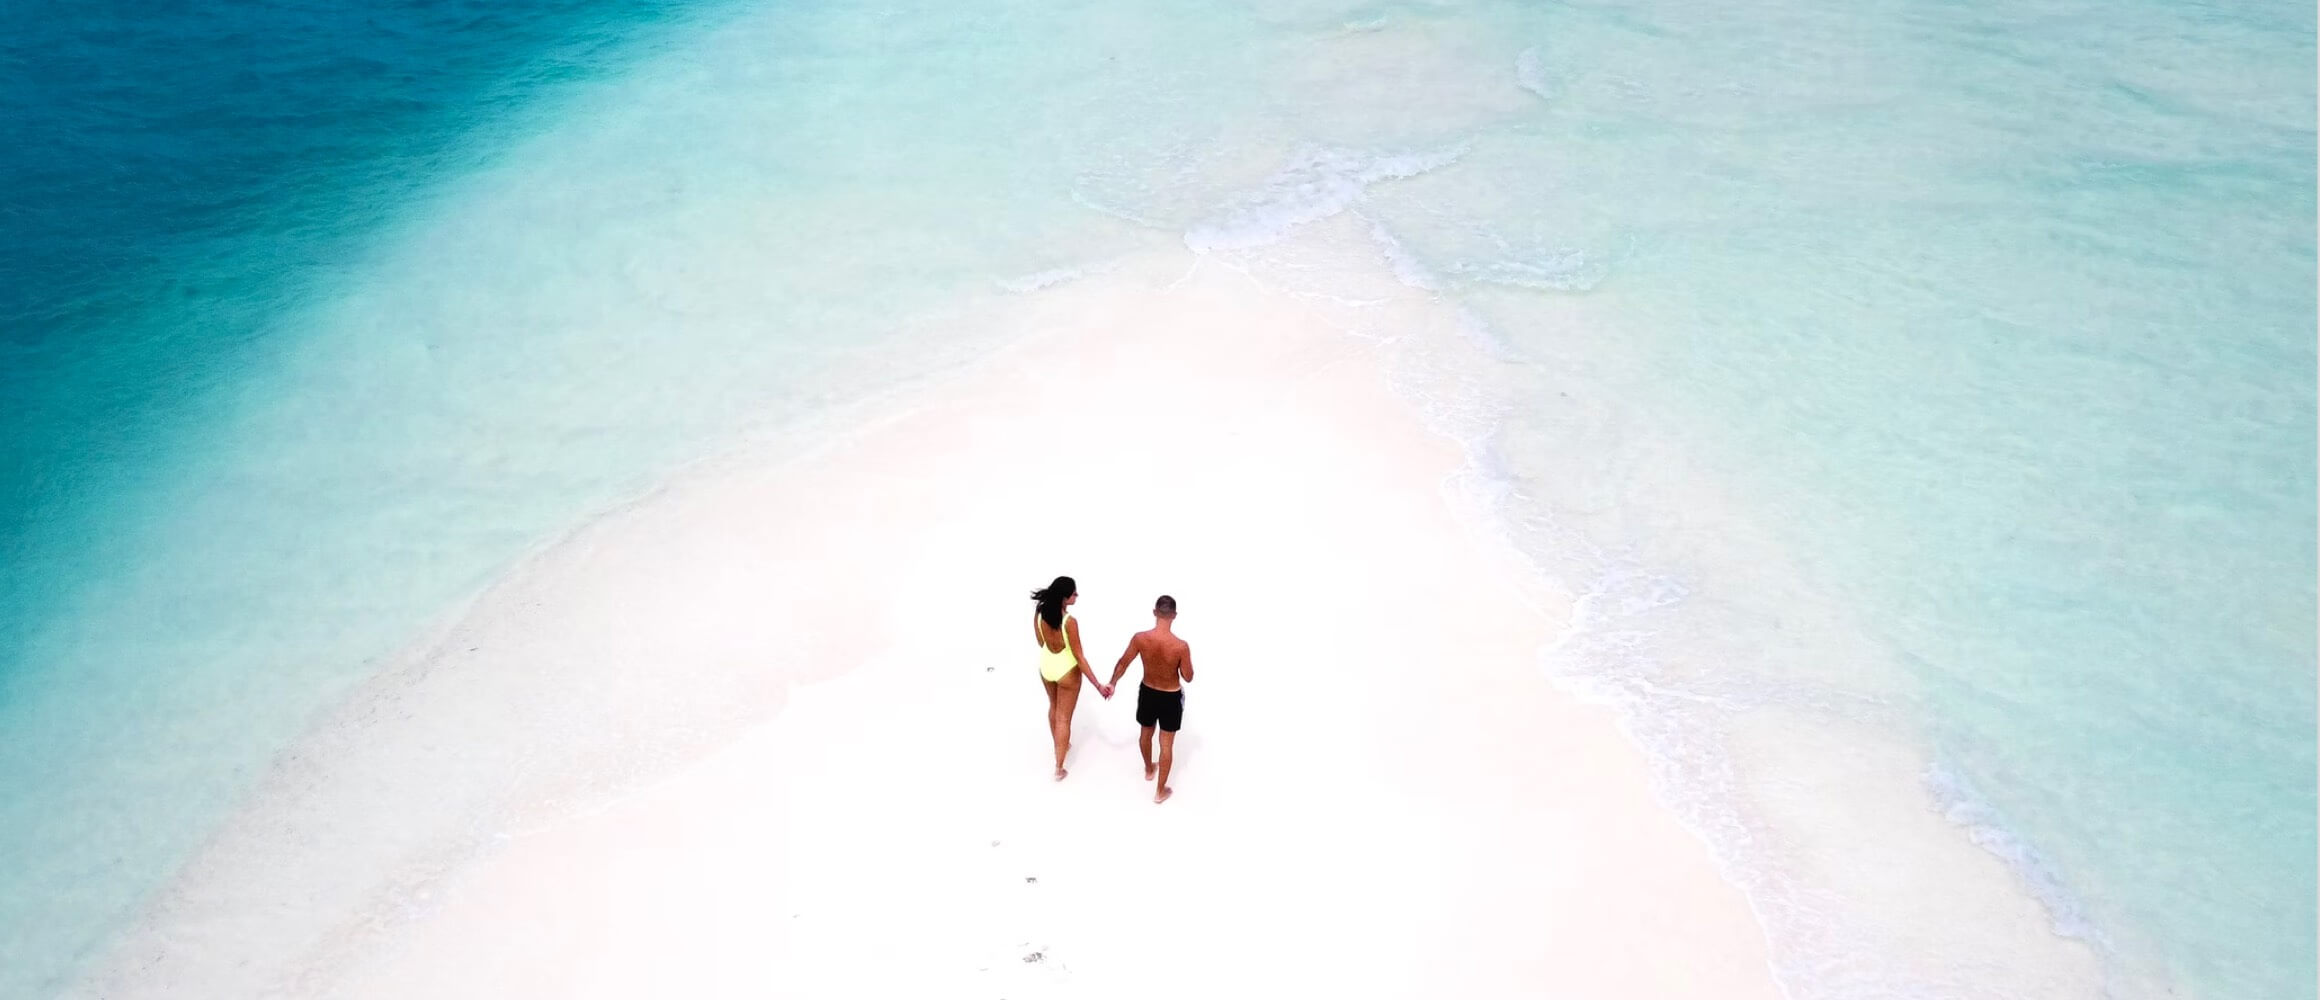 Two people on a tropical island in the middle of the ocean